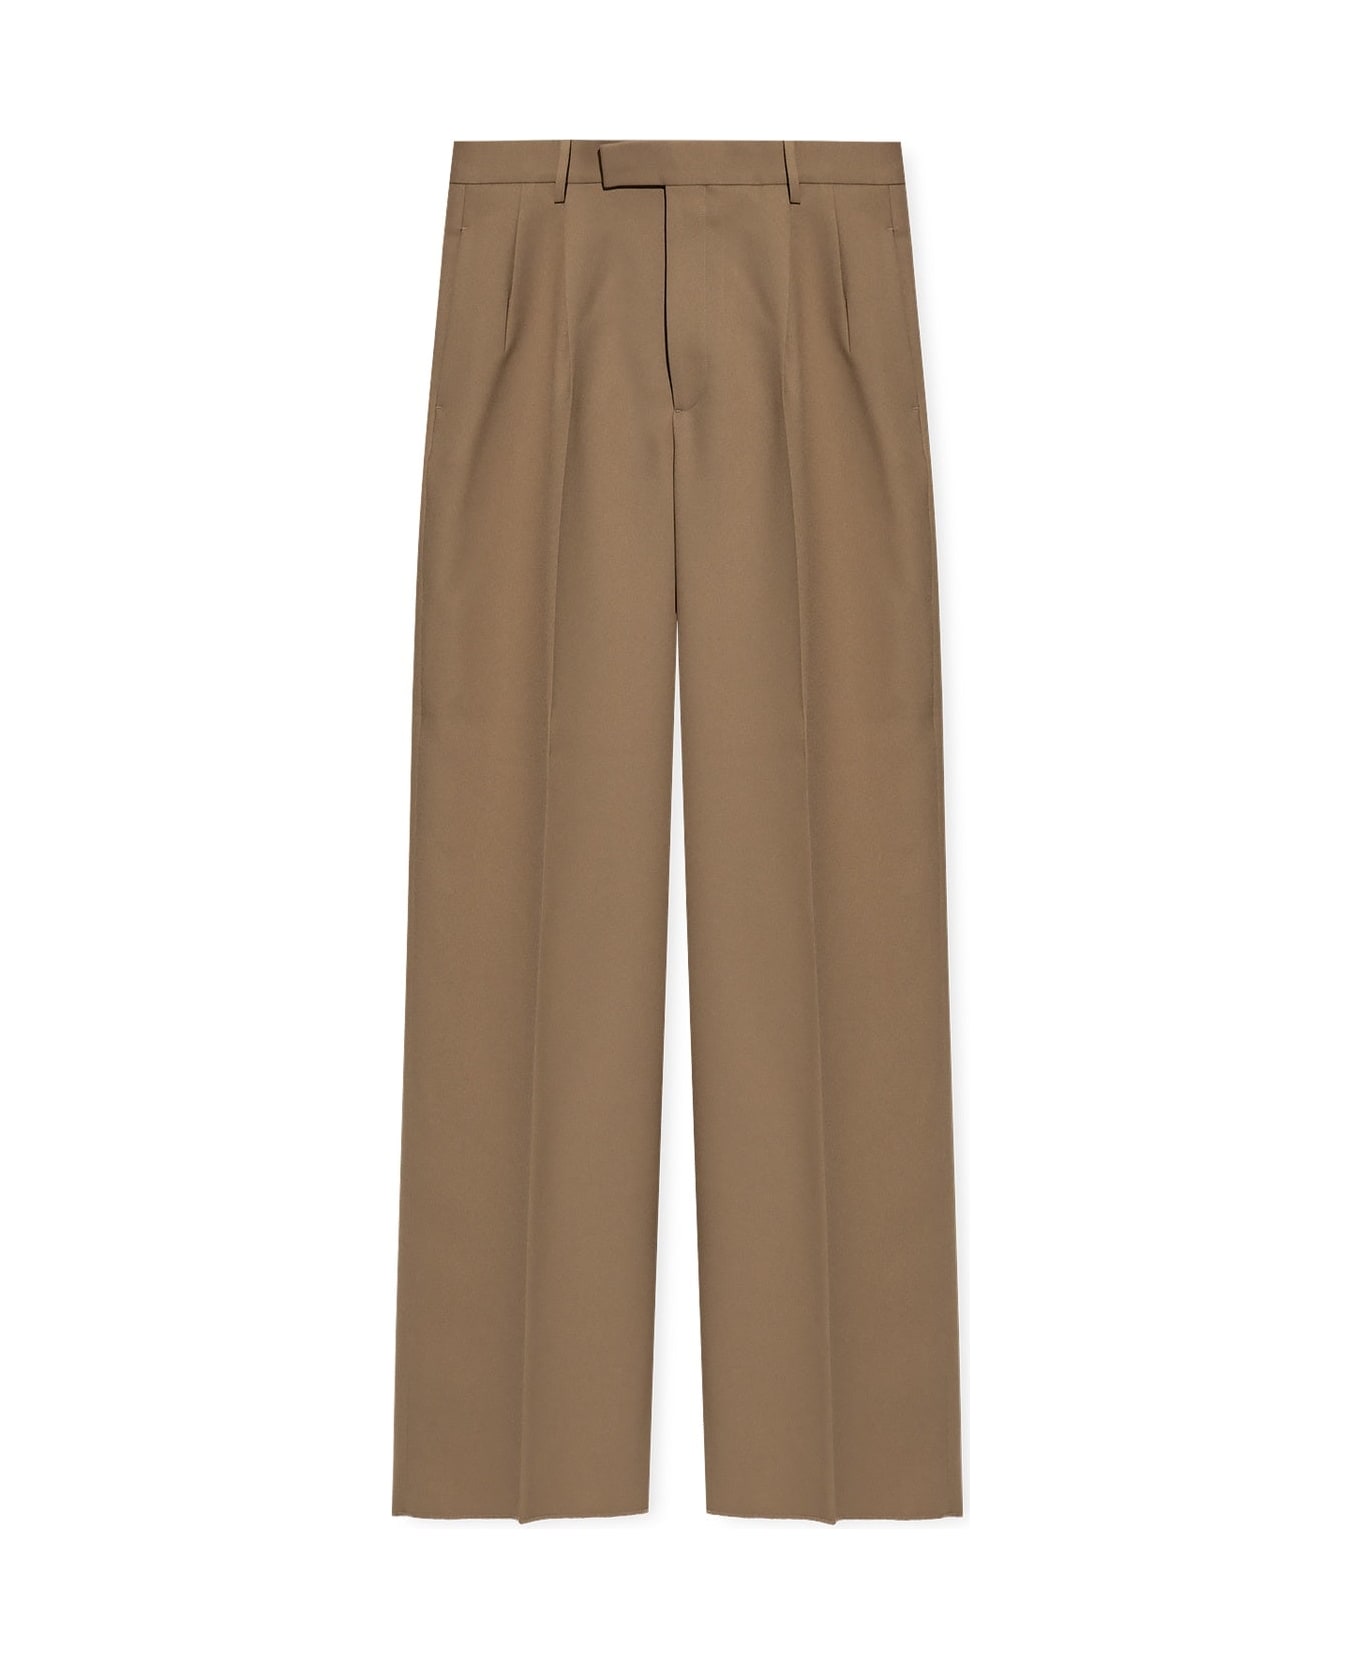 Gucci Pleat-front Trousers - Beige ボトムス